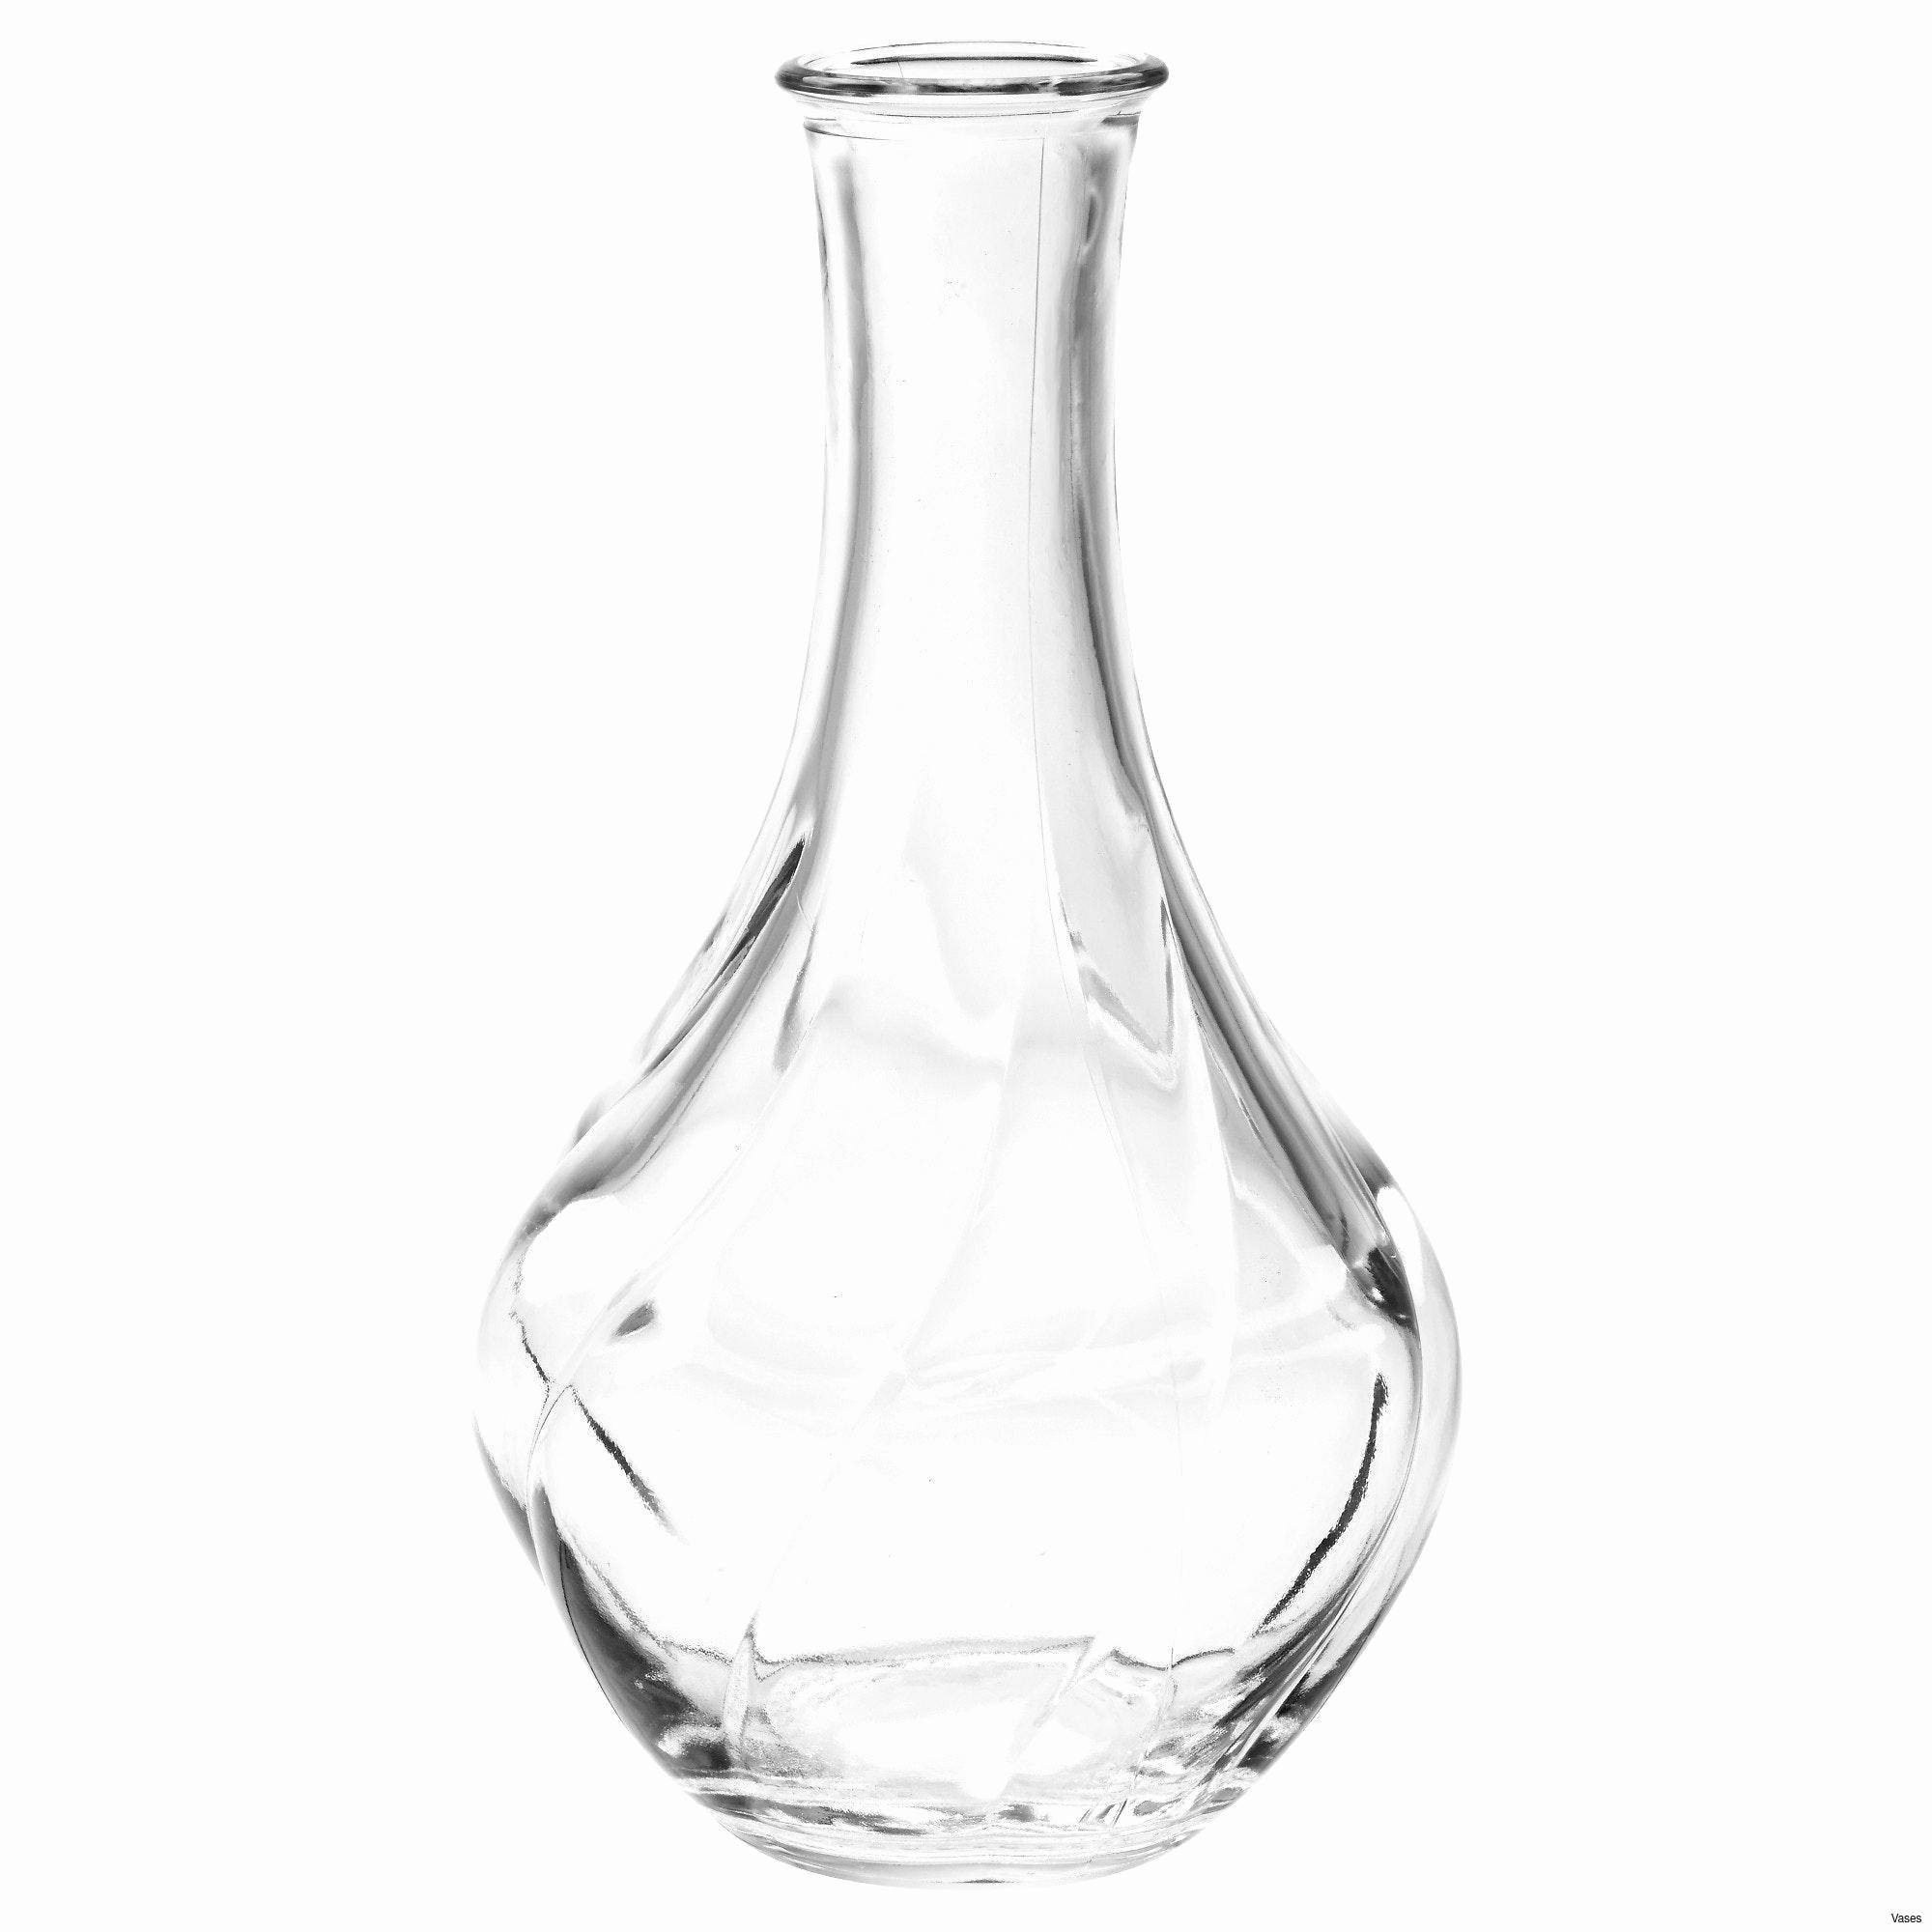 19 Recommended Ceska Crystal Vase 2024 free download ceska crystal vase of 20 fresh gold cylinder vase bogekompresorturkiye com in kitchen cabinet doors hawaii unique living room glass vases fresh clear vase 0d tags amazing as